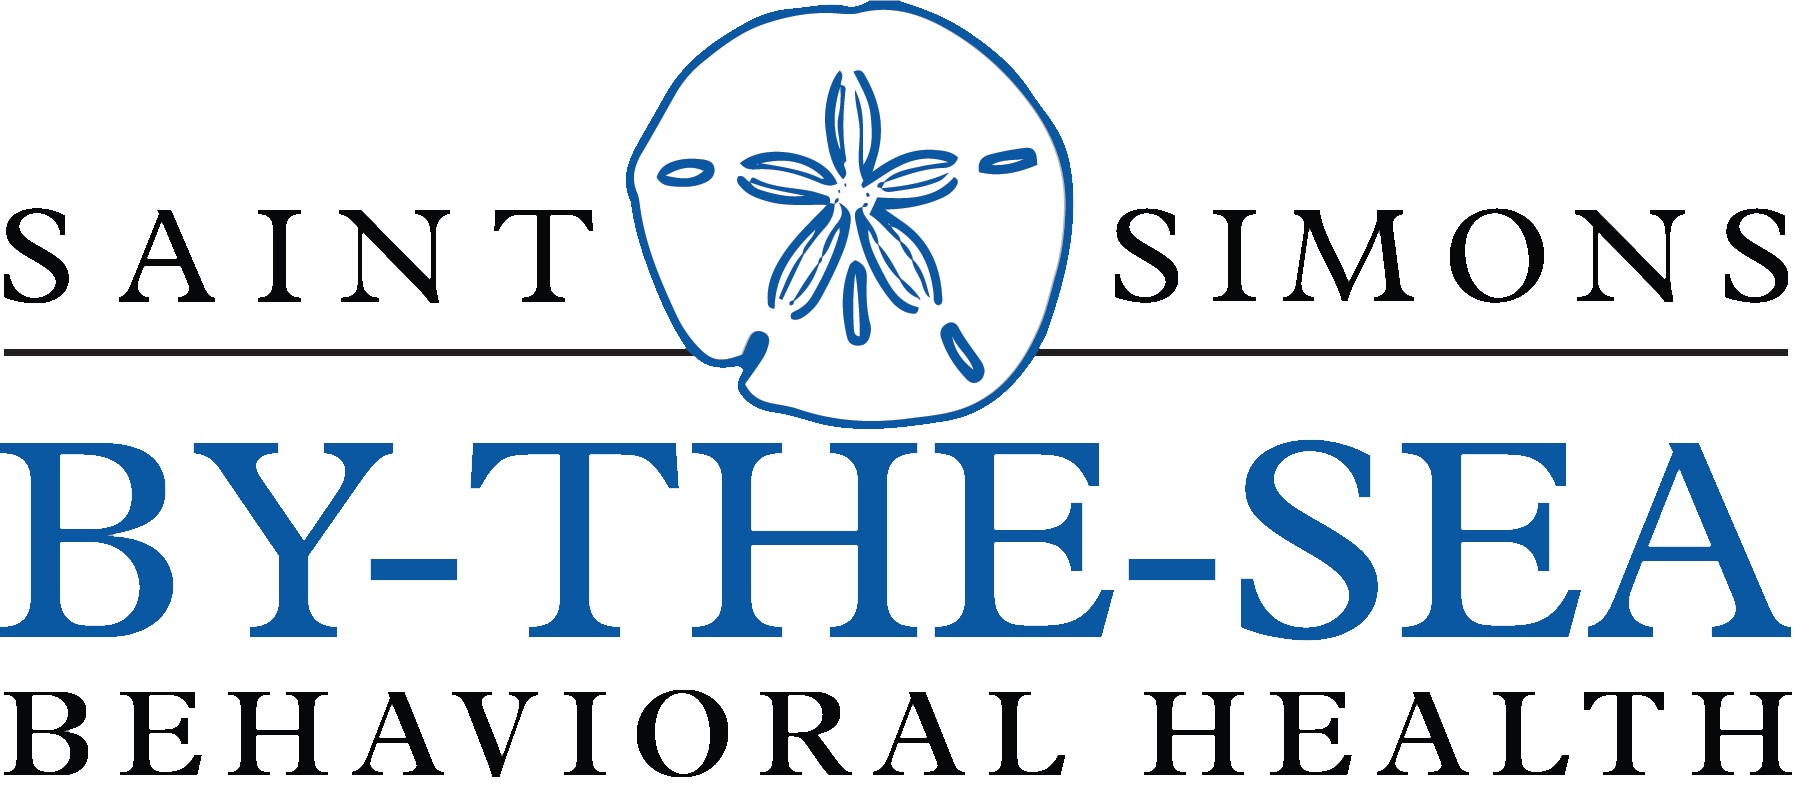 St. Simons by the Sea Behavioral Health